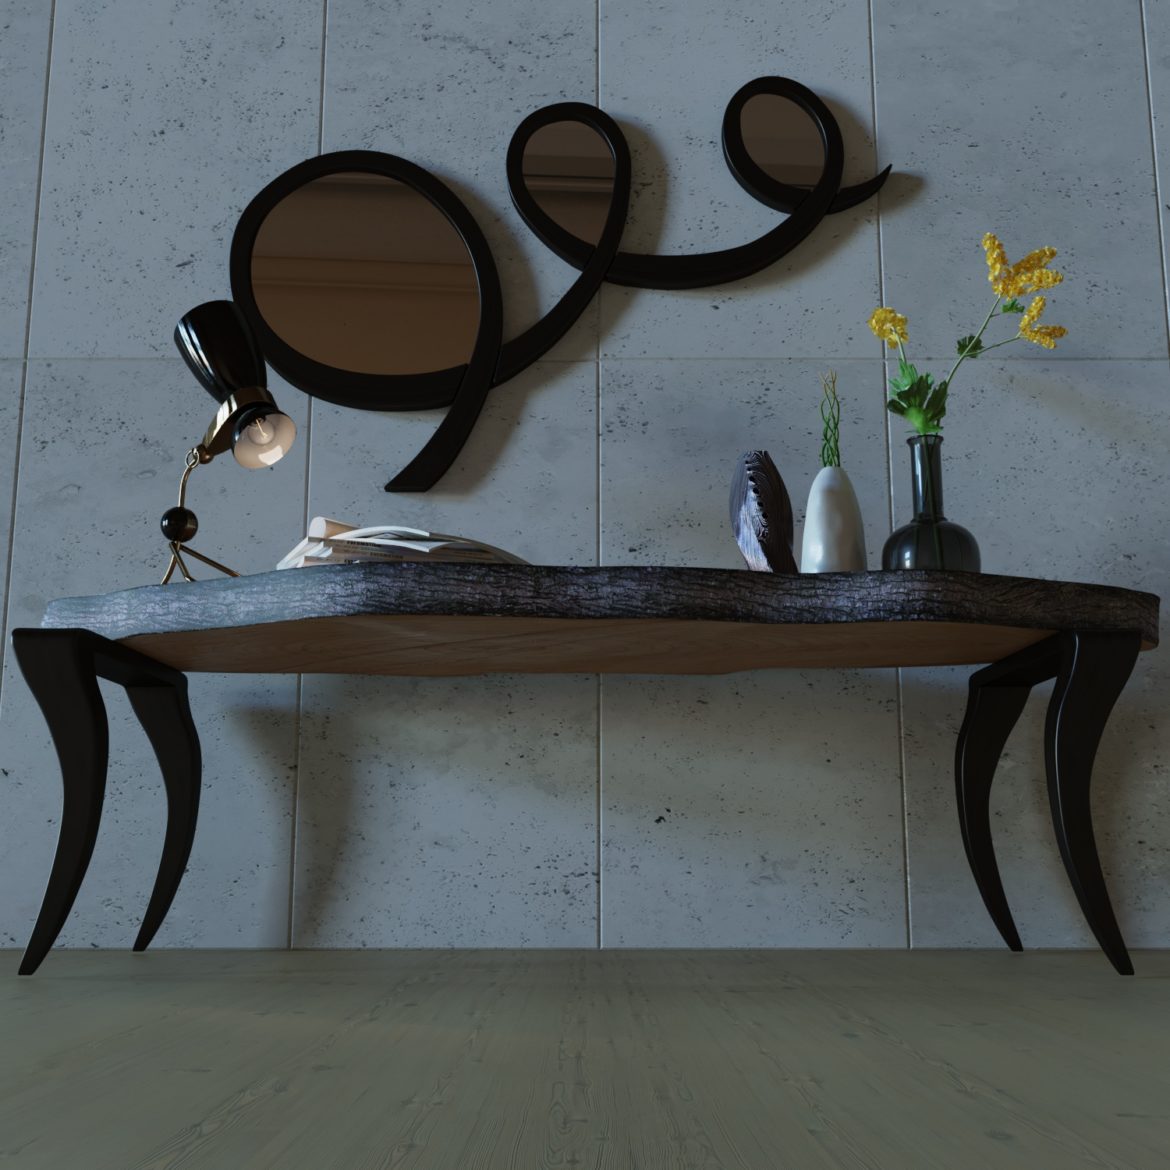 table and mirror-16 3d model max obj 295986